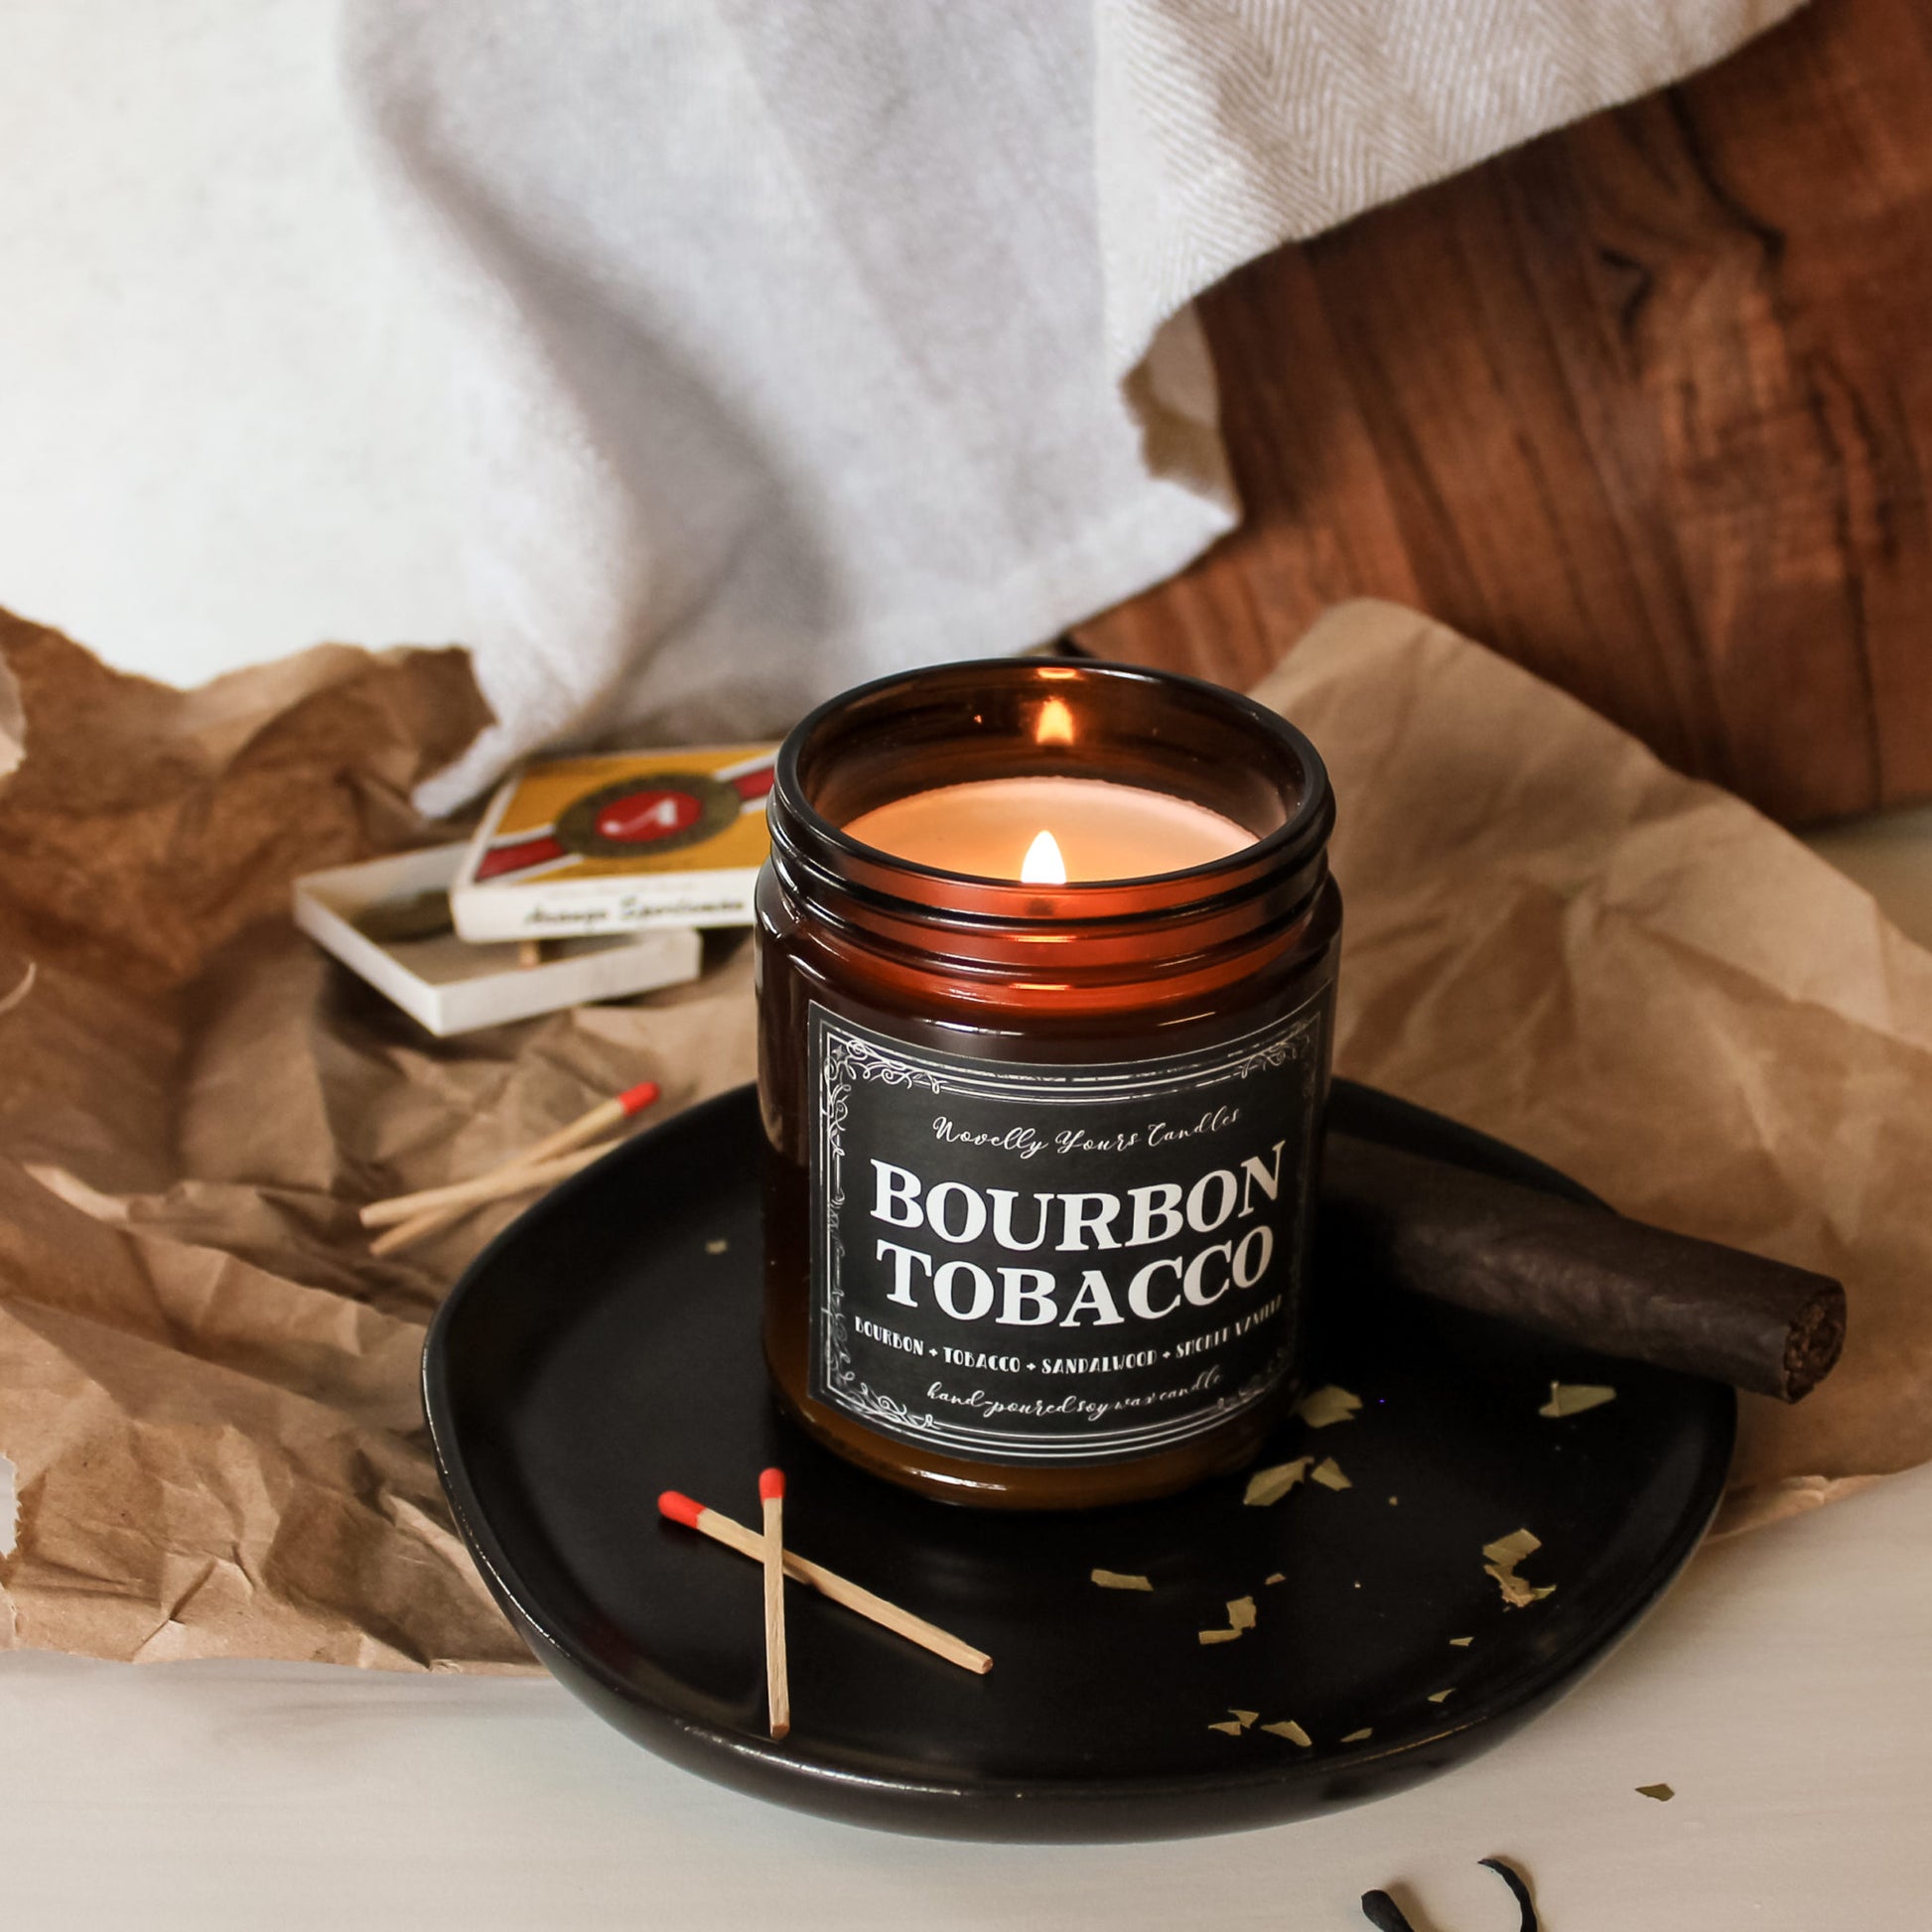 bourbon tobacco named candle in amber glass jar with black lid, sits lit on black tray surrounded by cigar, matches, and tobacco leaves